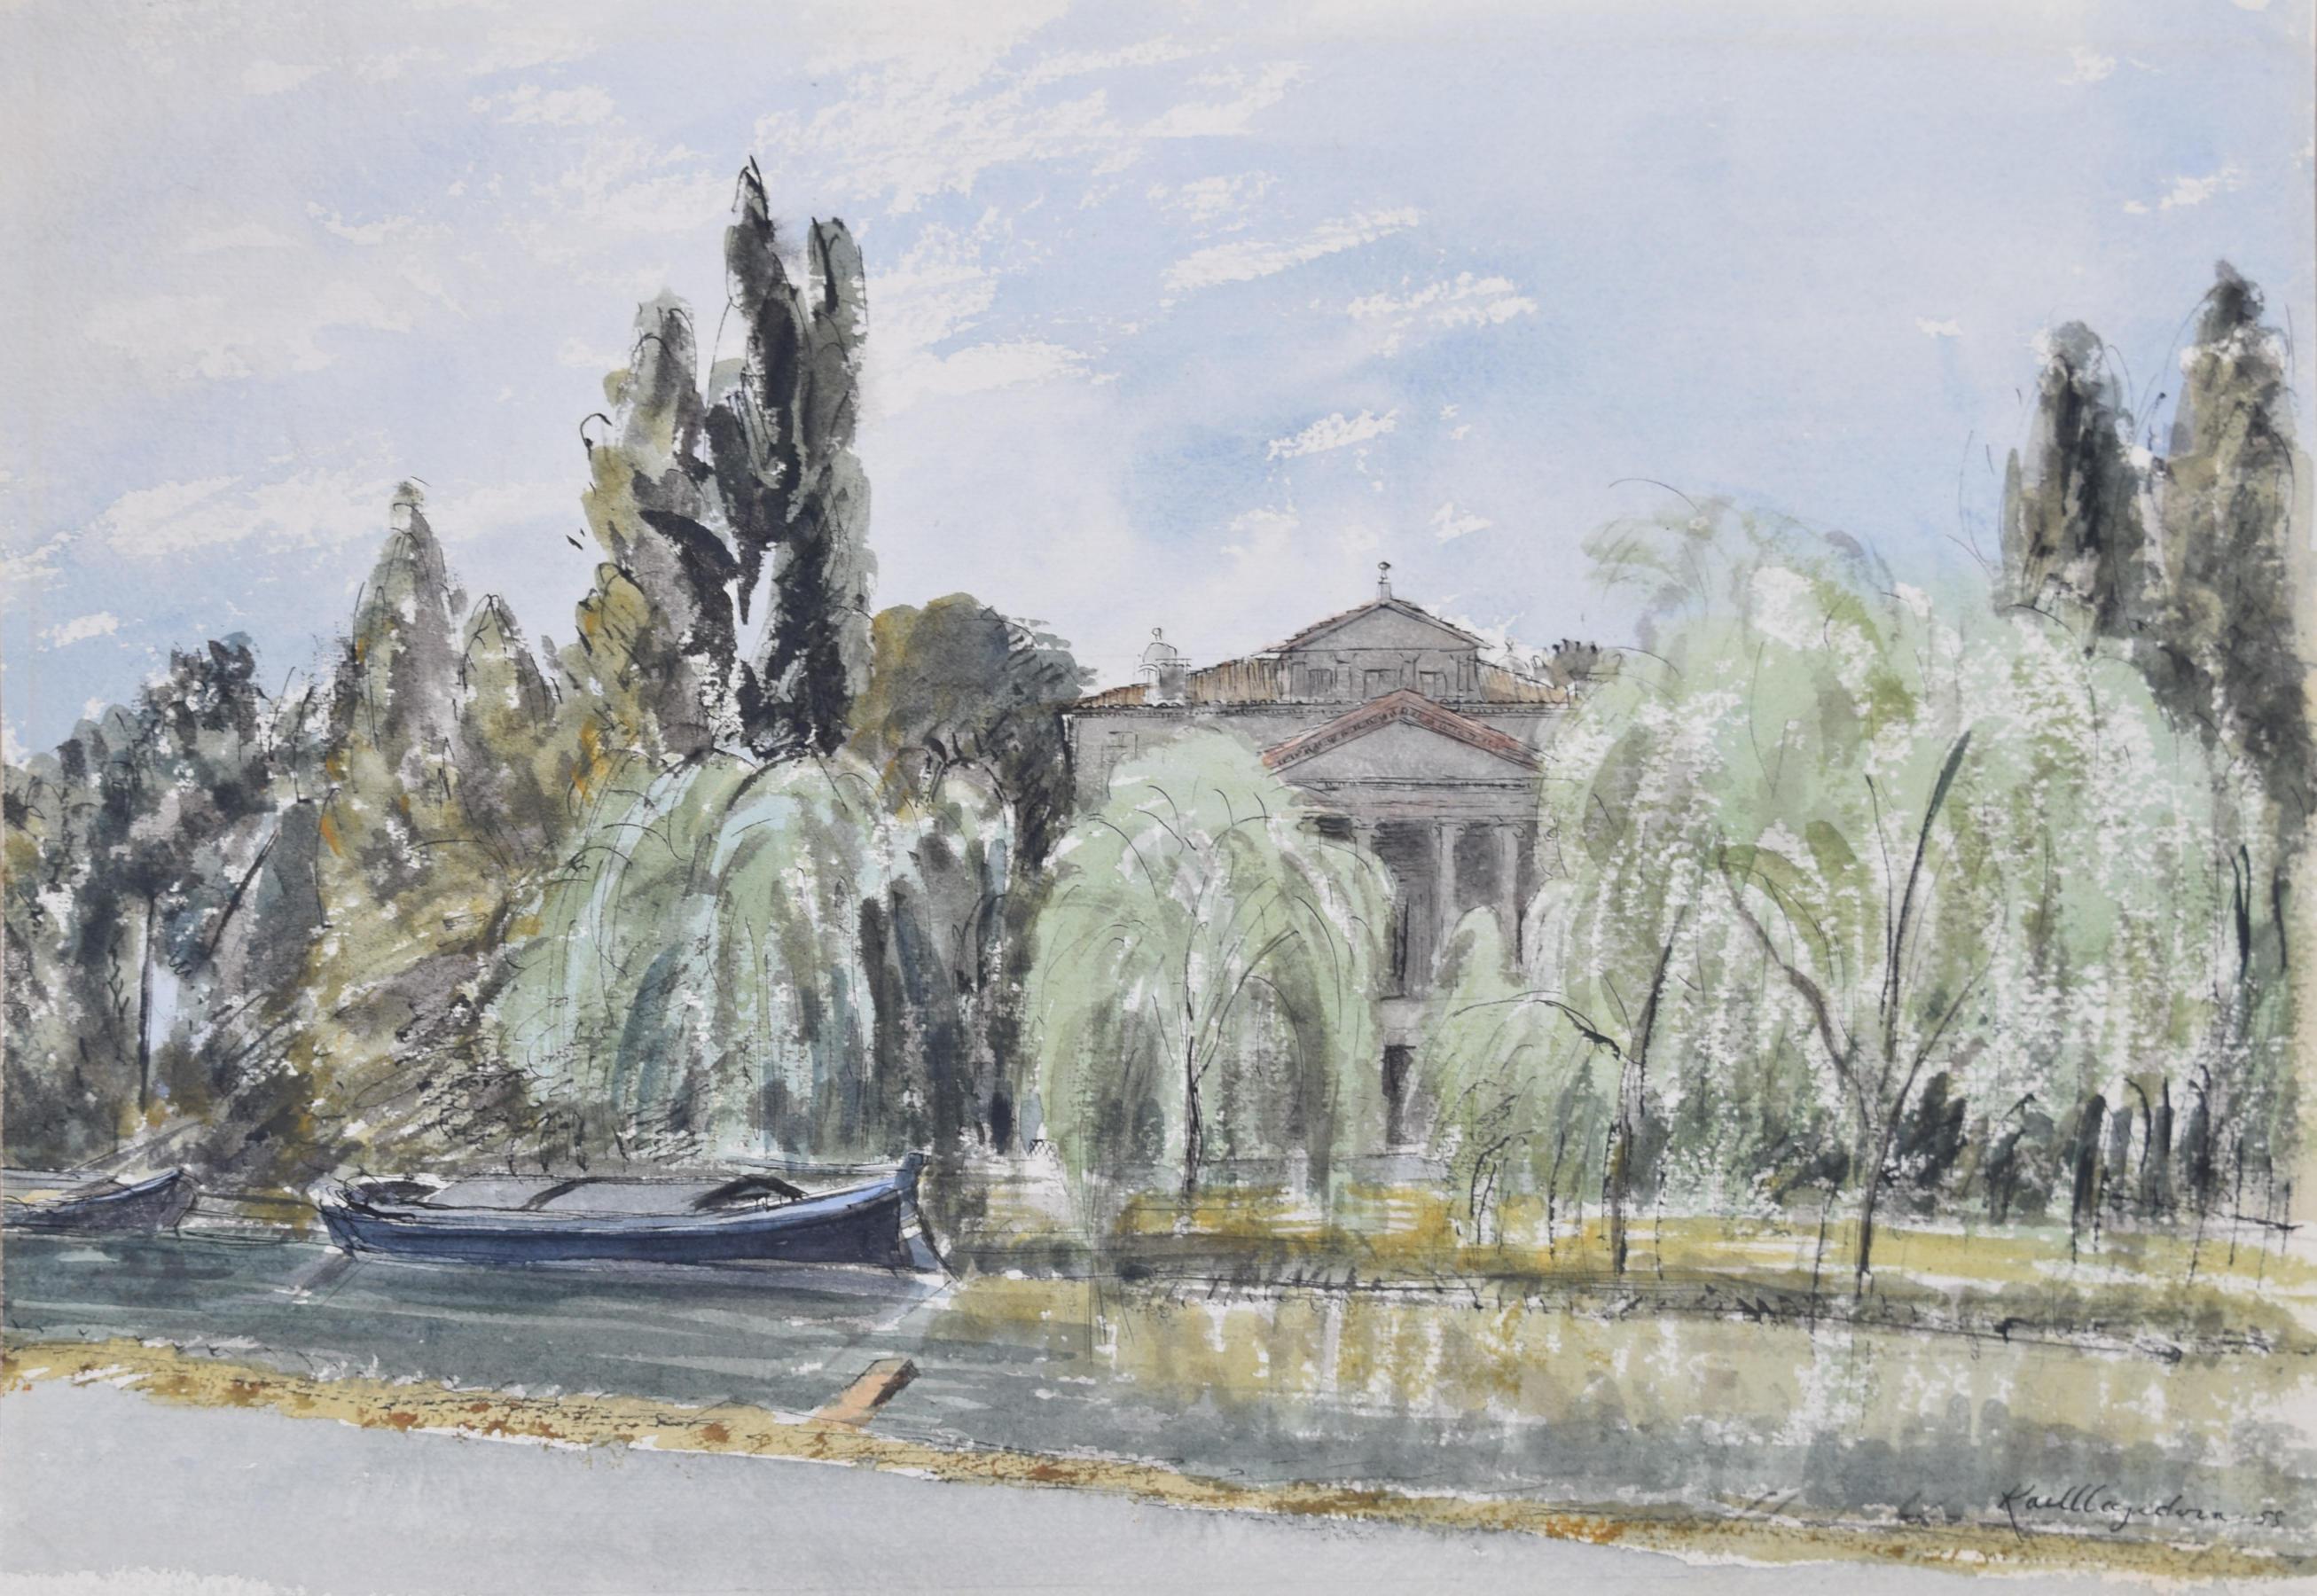 To see more, scroll down to "More from this Seller" and below it click on "See all from this Seller." 

Karl Hagedorn (1889 - 1969)
The Villa Malcontenta, Venice
Watercolour and ink
33 x 50 cm

Signed and dated 1958 lower right (dated August 23rd to